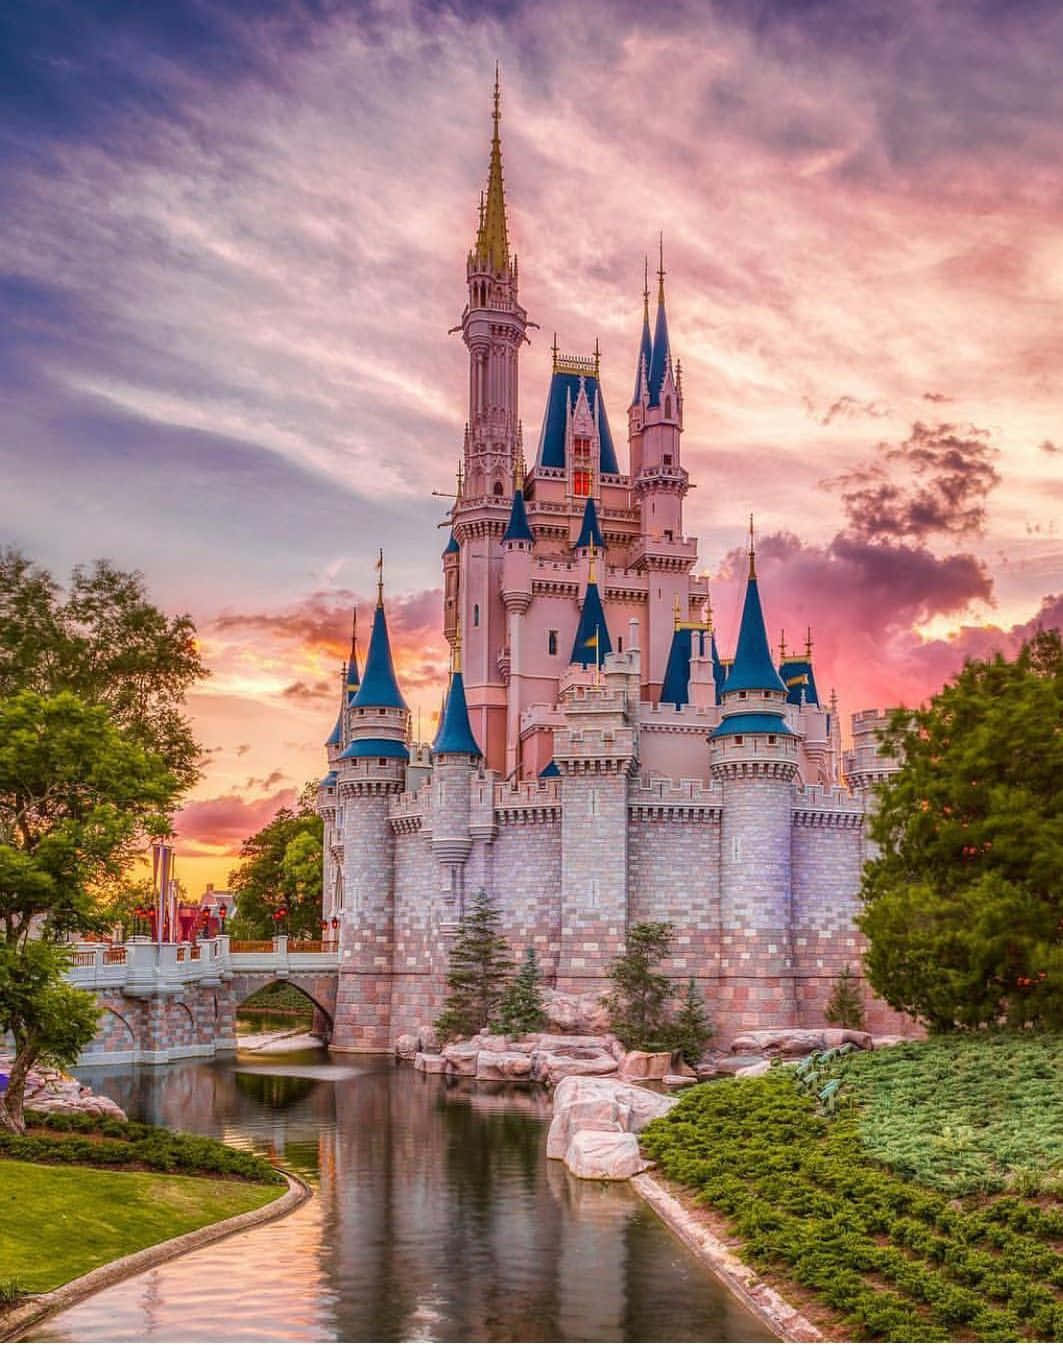 An Alluring View of Disney Castle